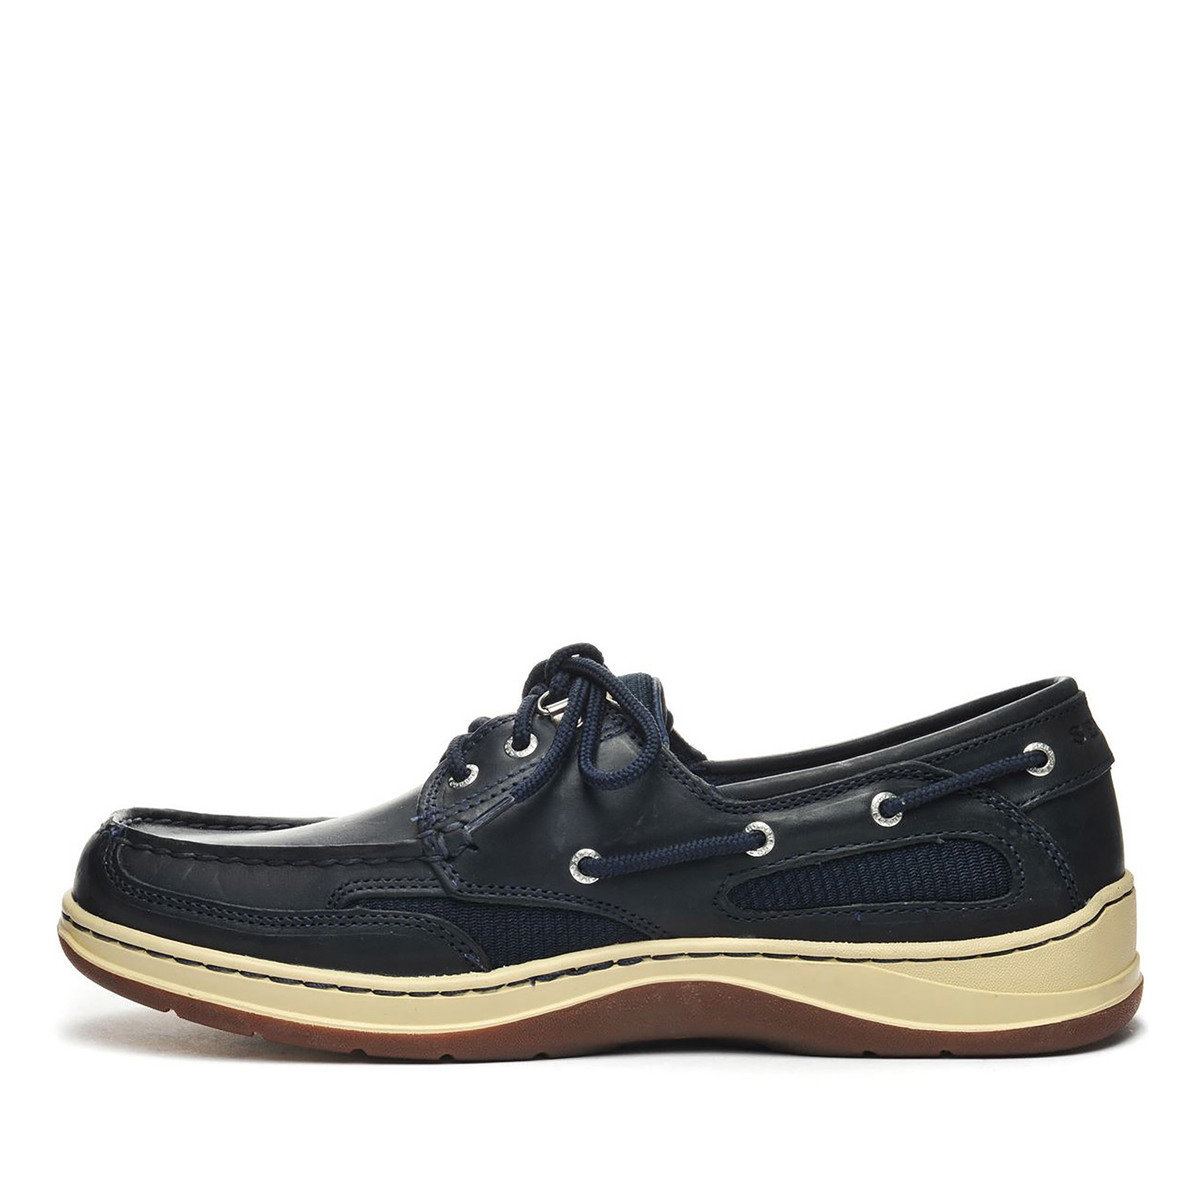 Clovehitch Waxed Leather Boat Shoe